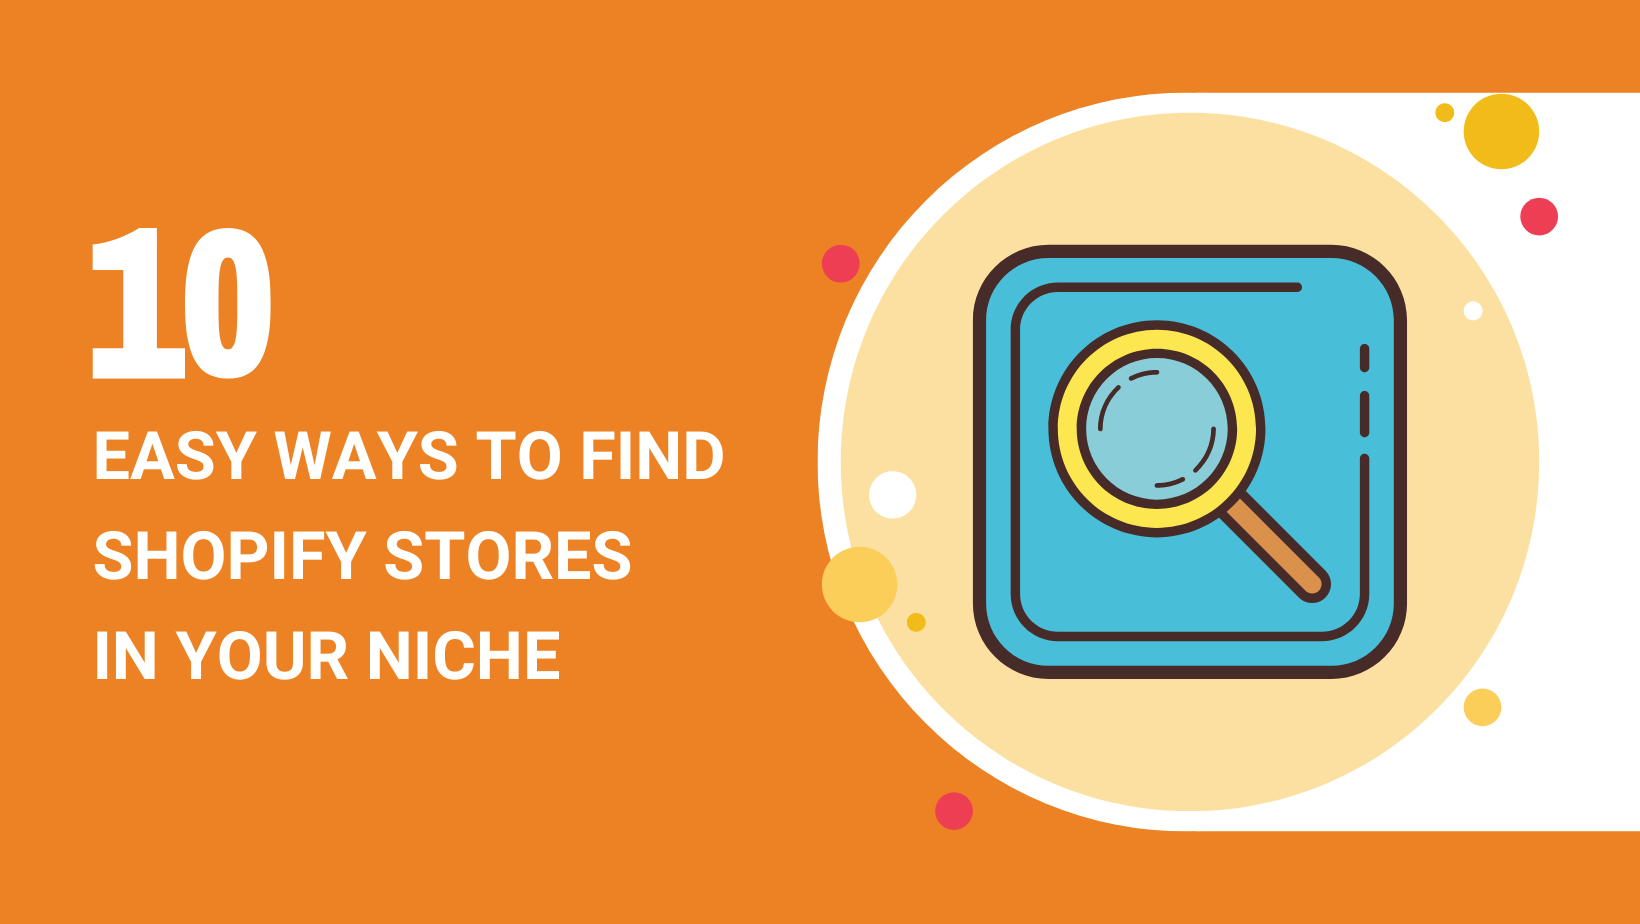 10 EASY WAYS TO FIND SHOPIFY STORES IN YOUR NICHE